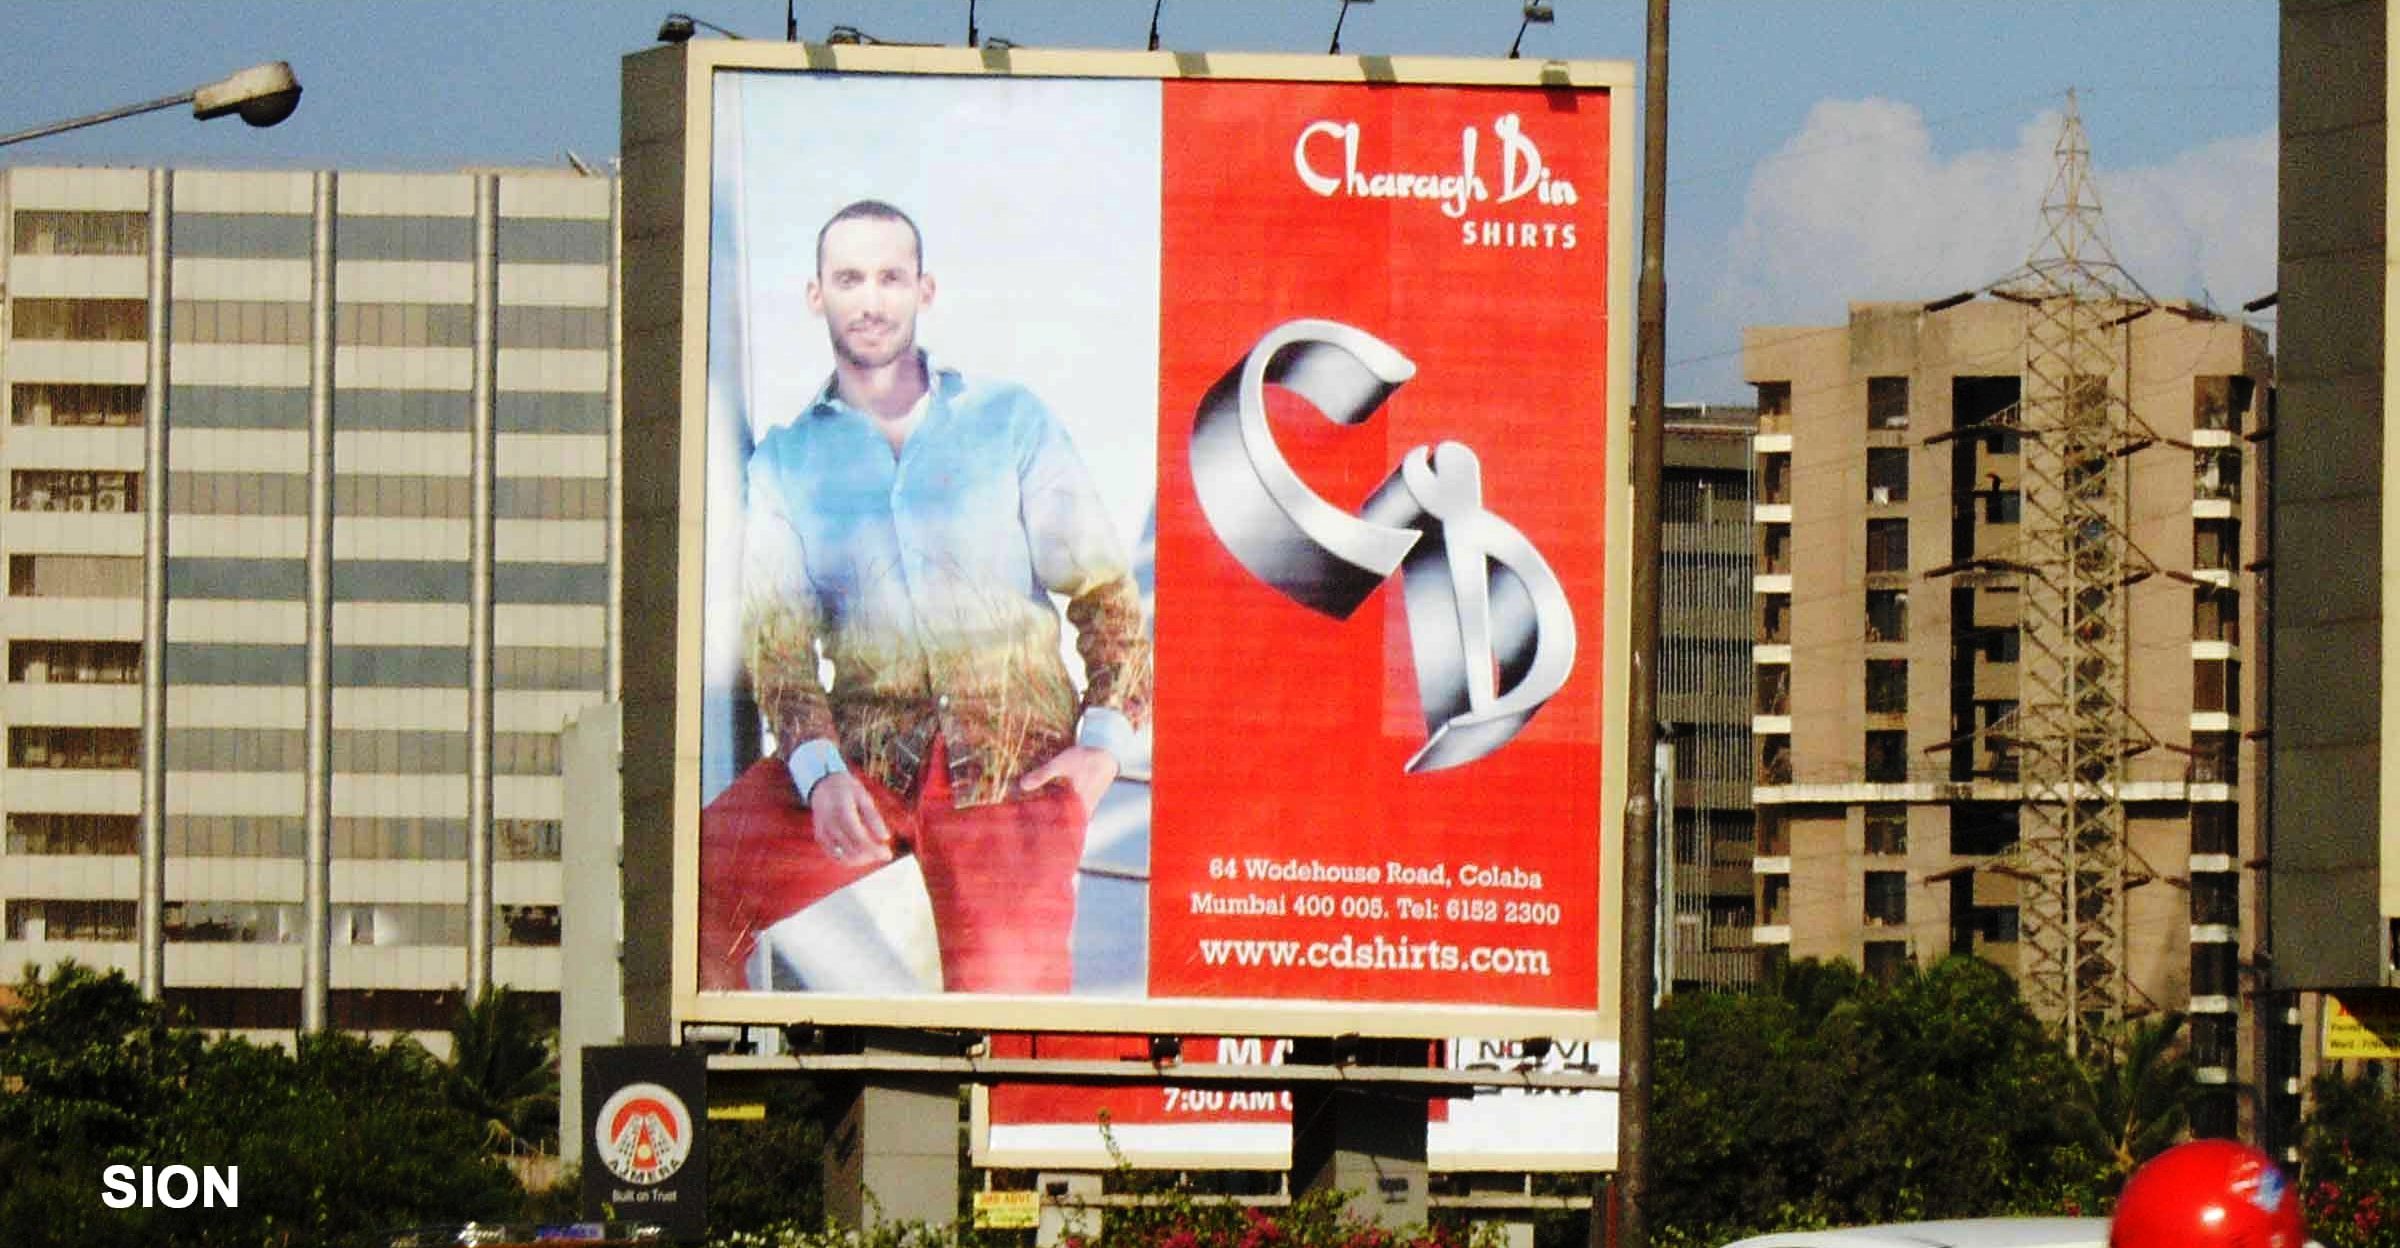 Global Advertisers rolls out OOH campaign for Charagh Din